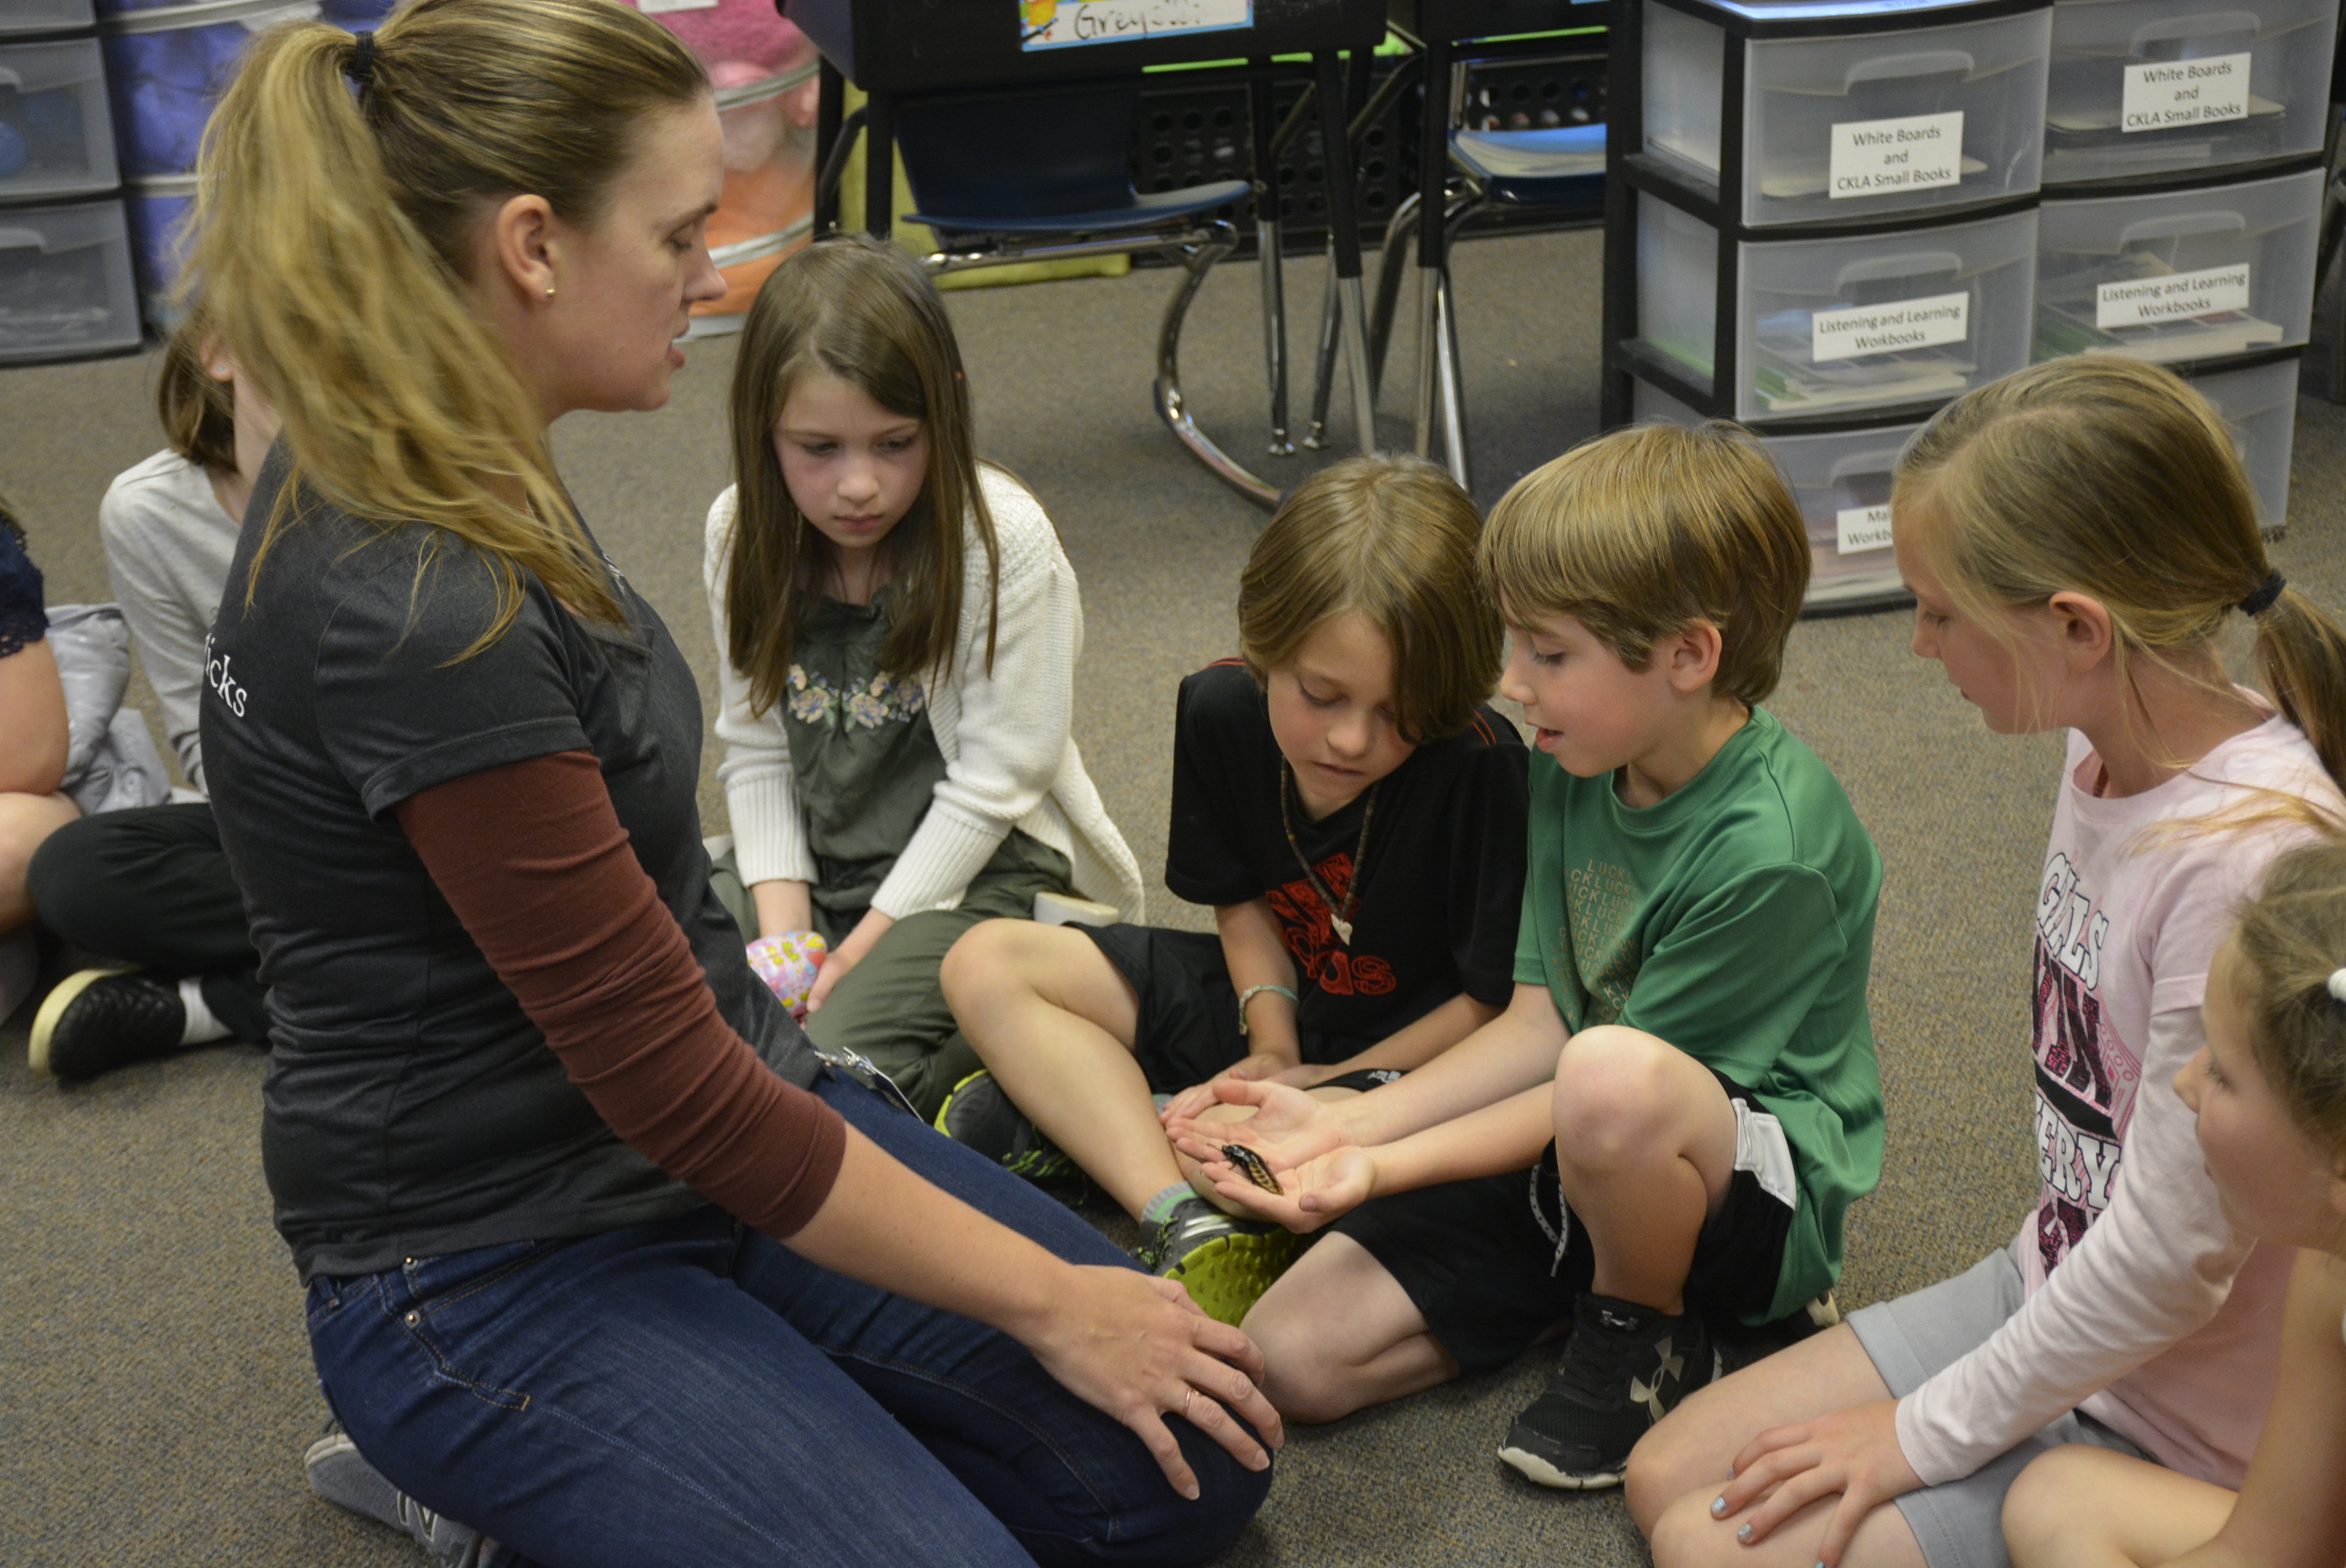 Entomologist Kristine Reddick hands an insect to a student and allows a student to touch it's back while other students look